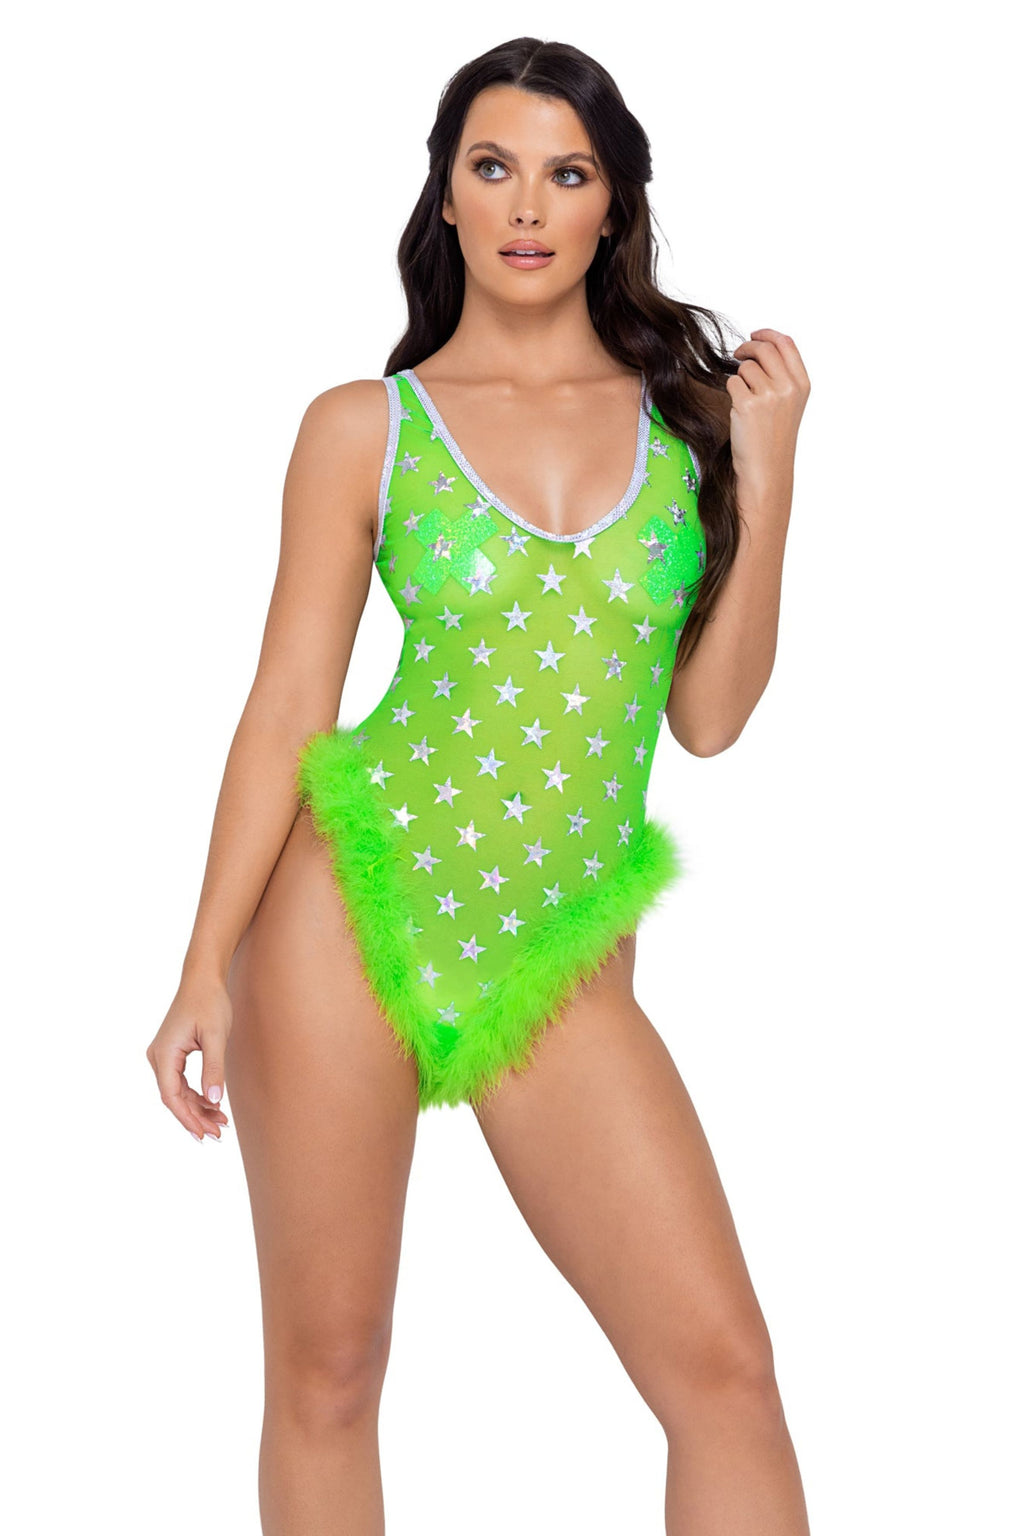 Rave Bodysuits, Rave Outfits Women